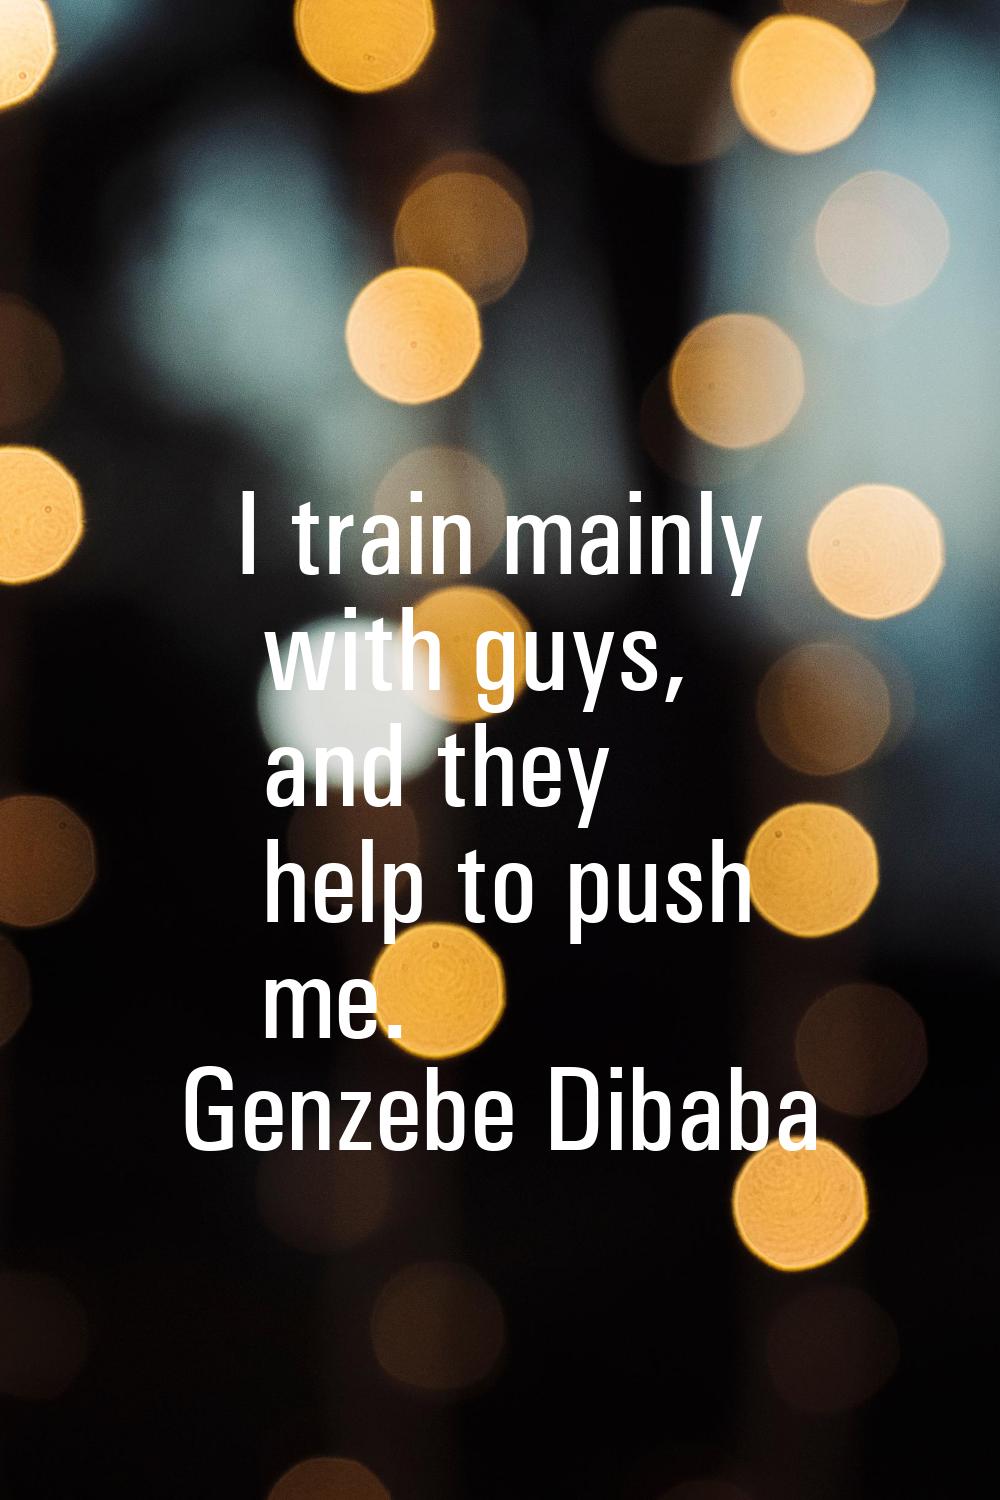 I train mainly with guys, and they help to push me.